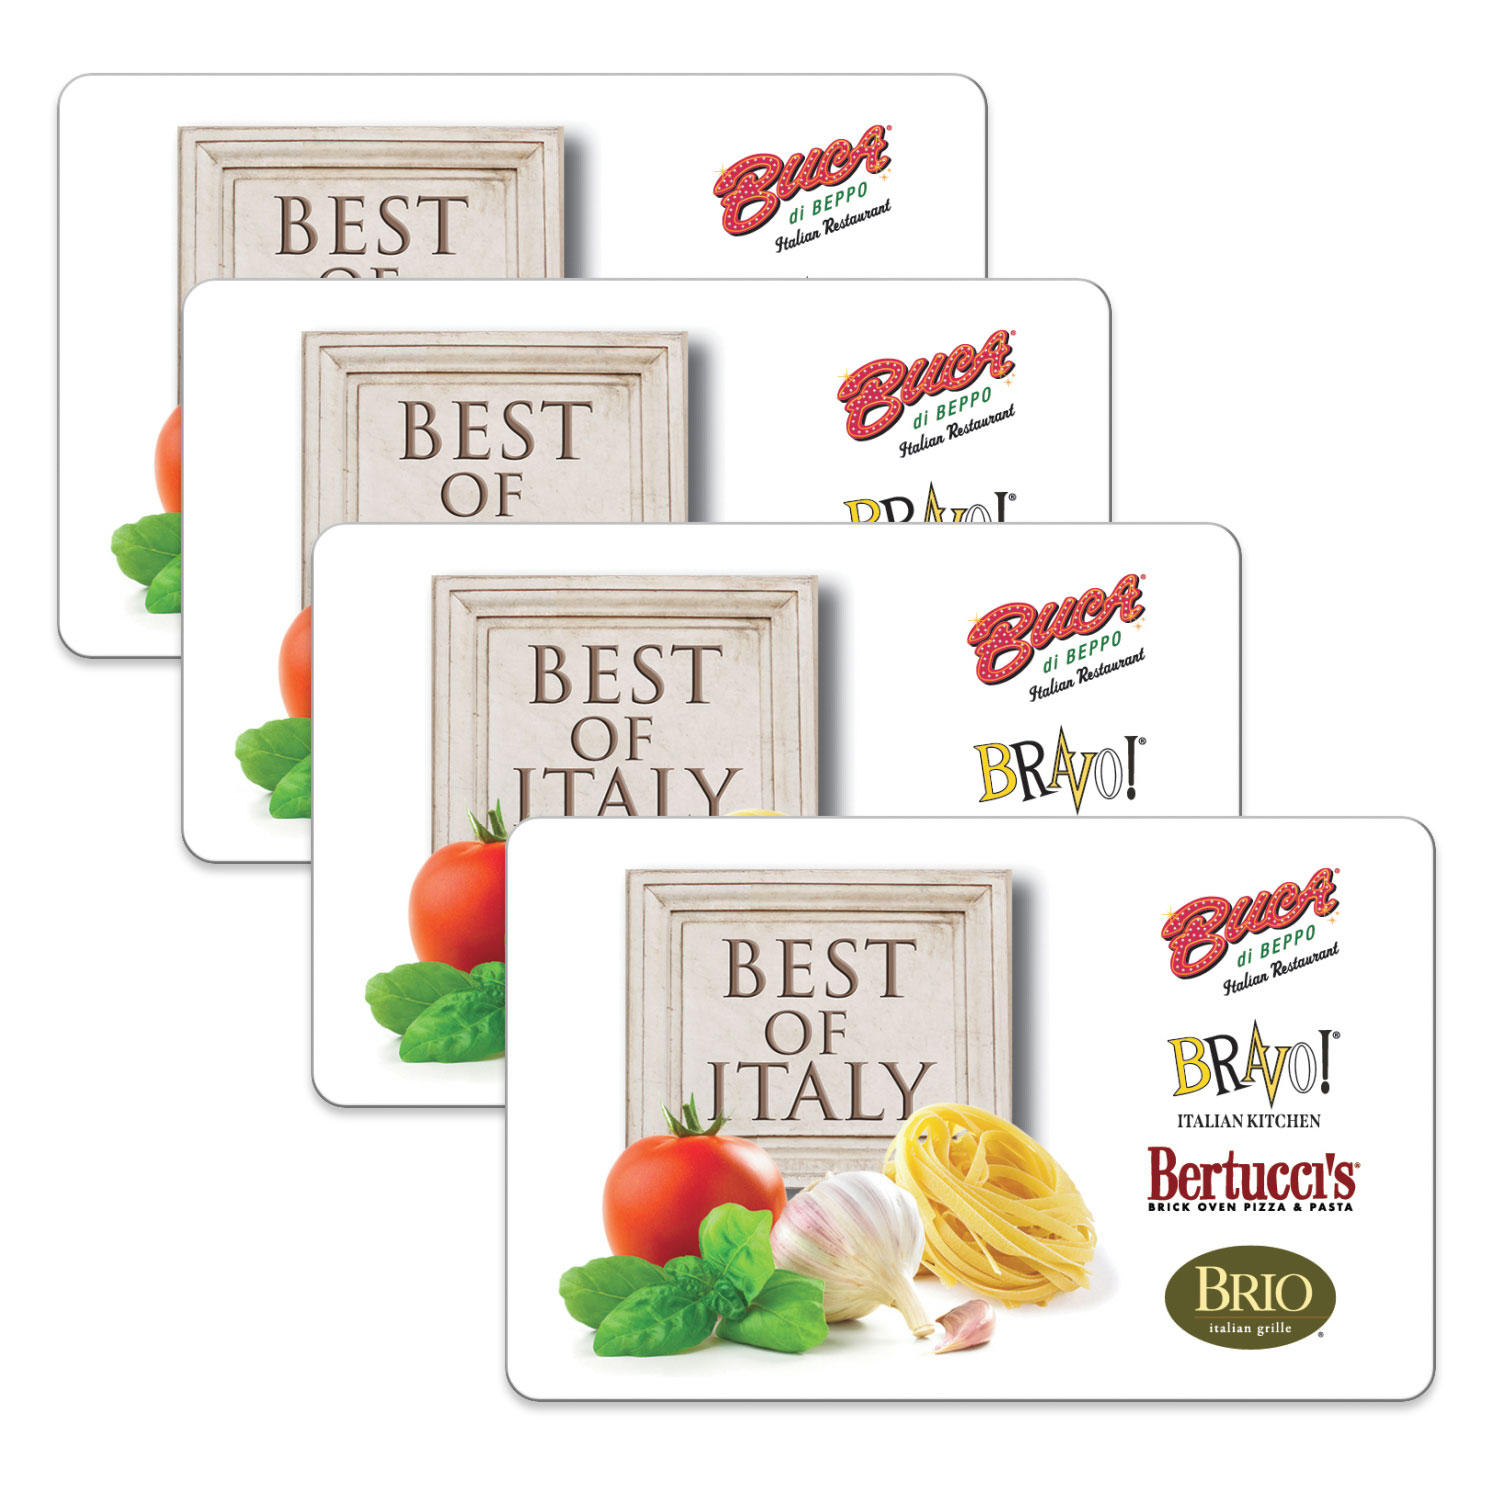 $100 (4 x $25) Best of Italy Gift Cards